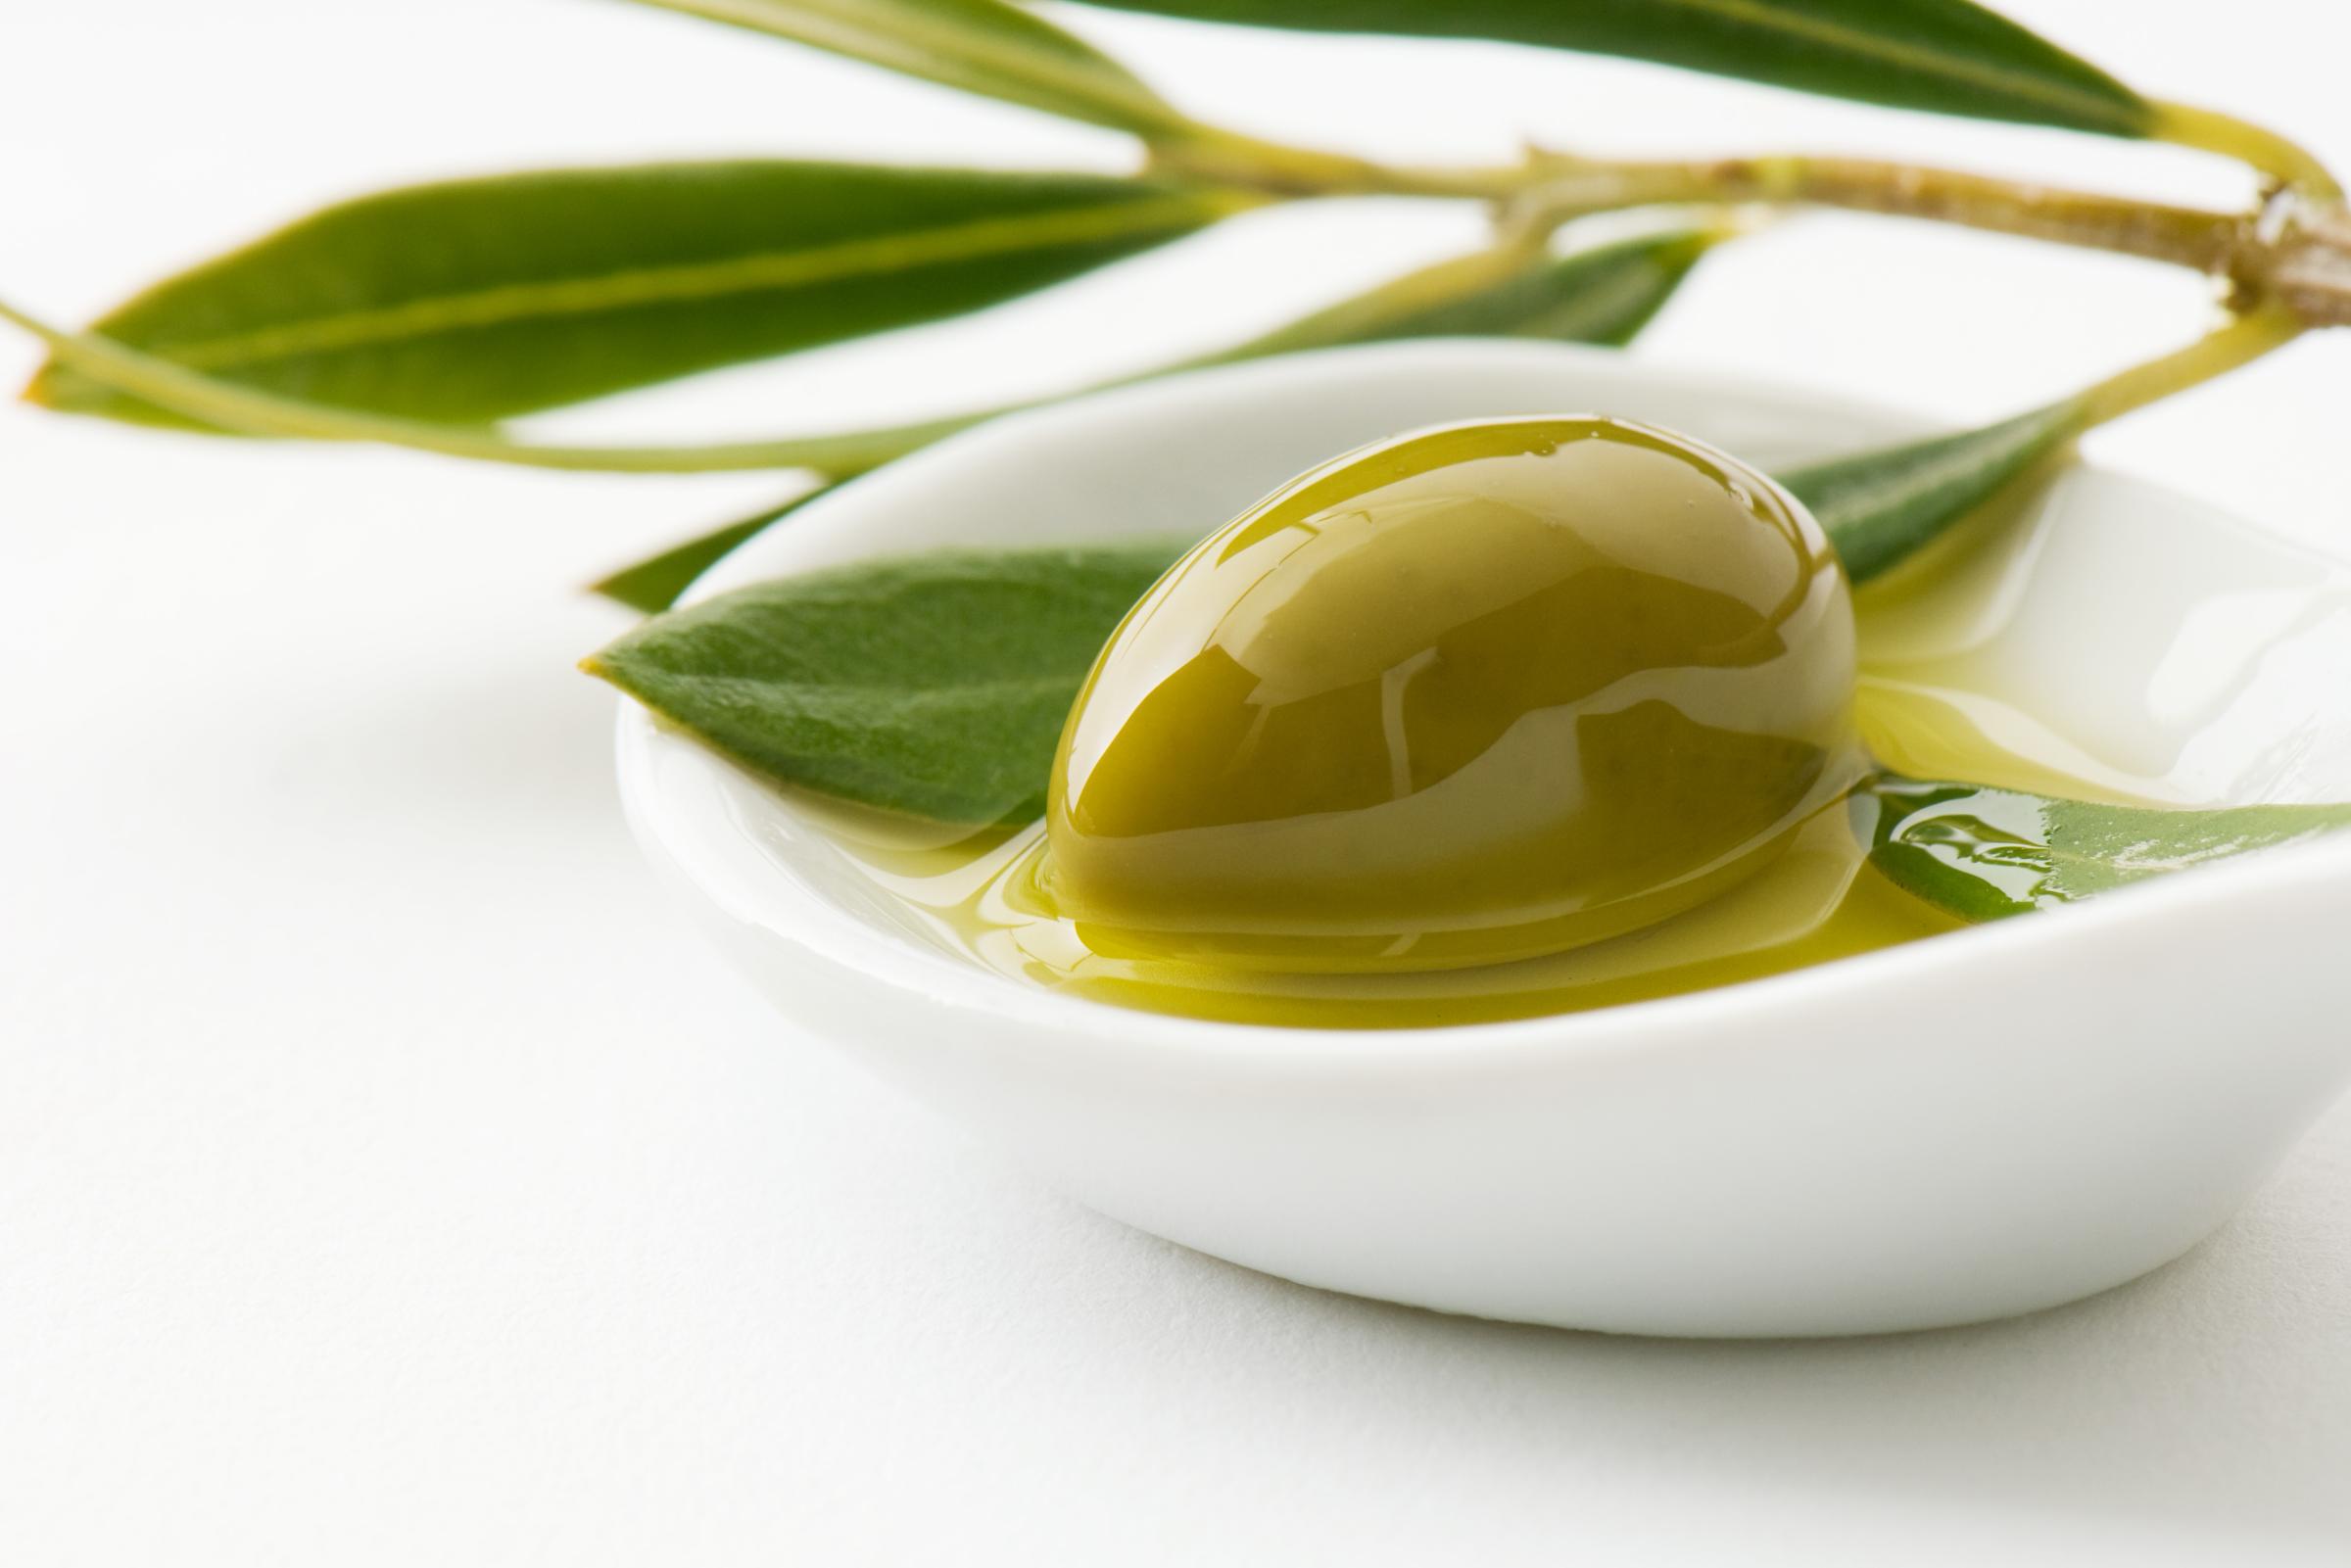 Green olive and sprig of leaves in small dish of olive oil, close-up